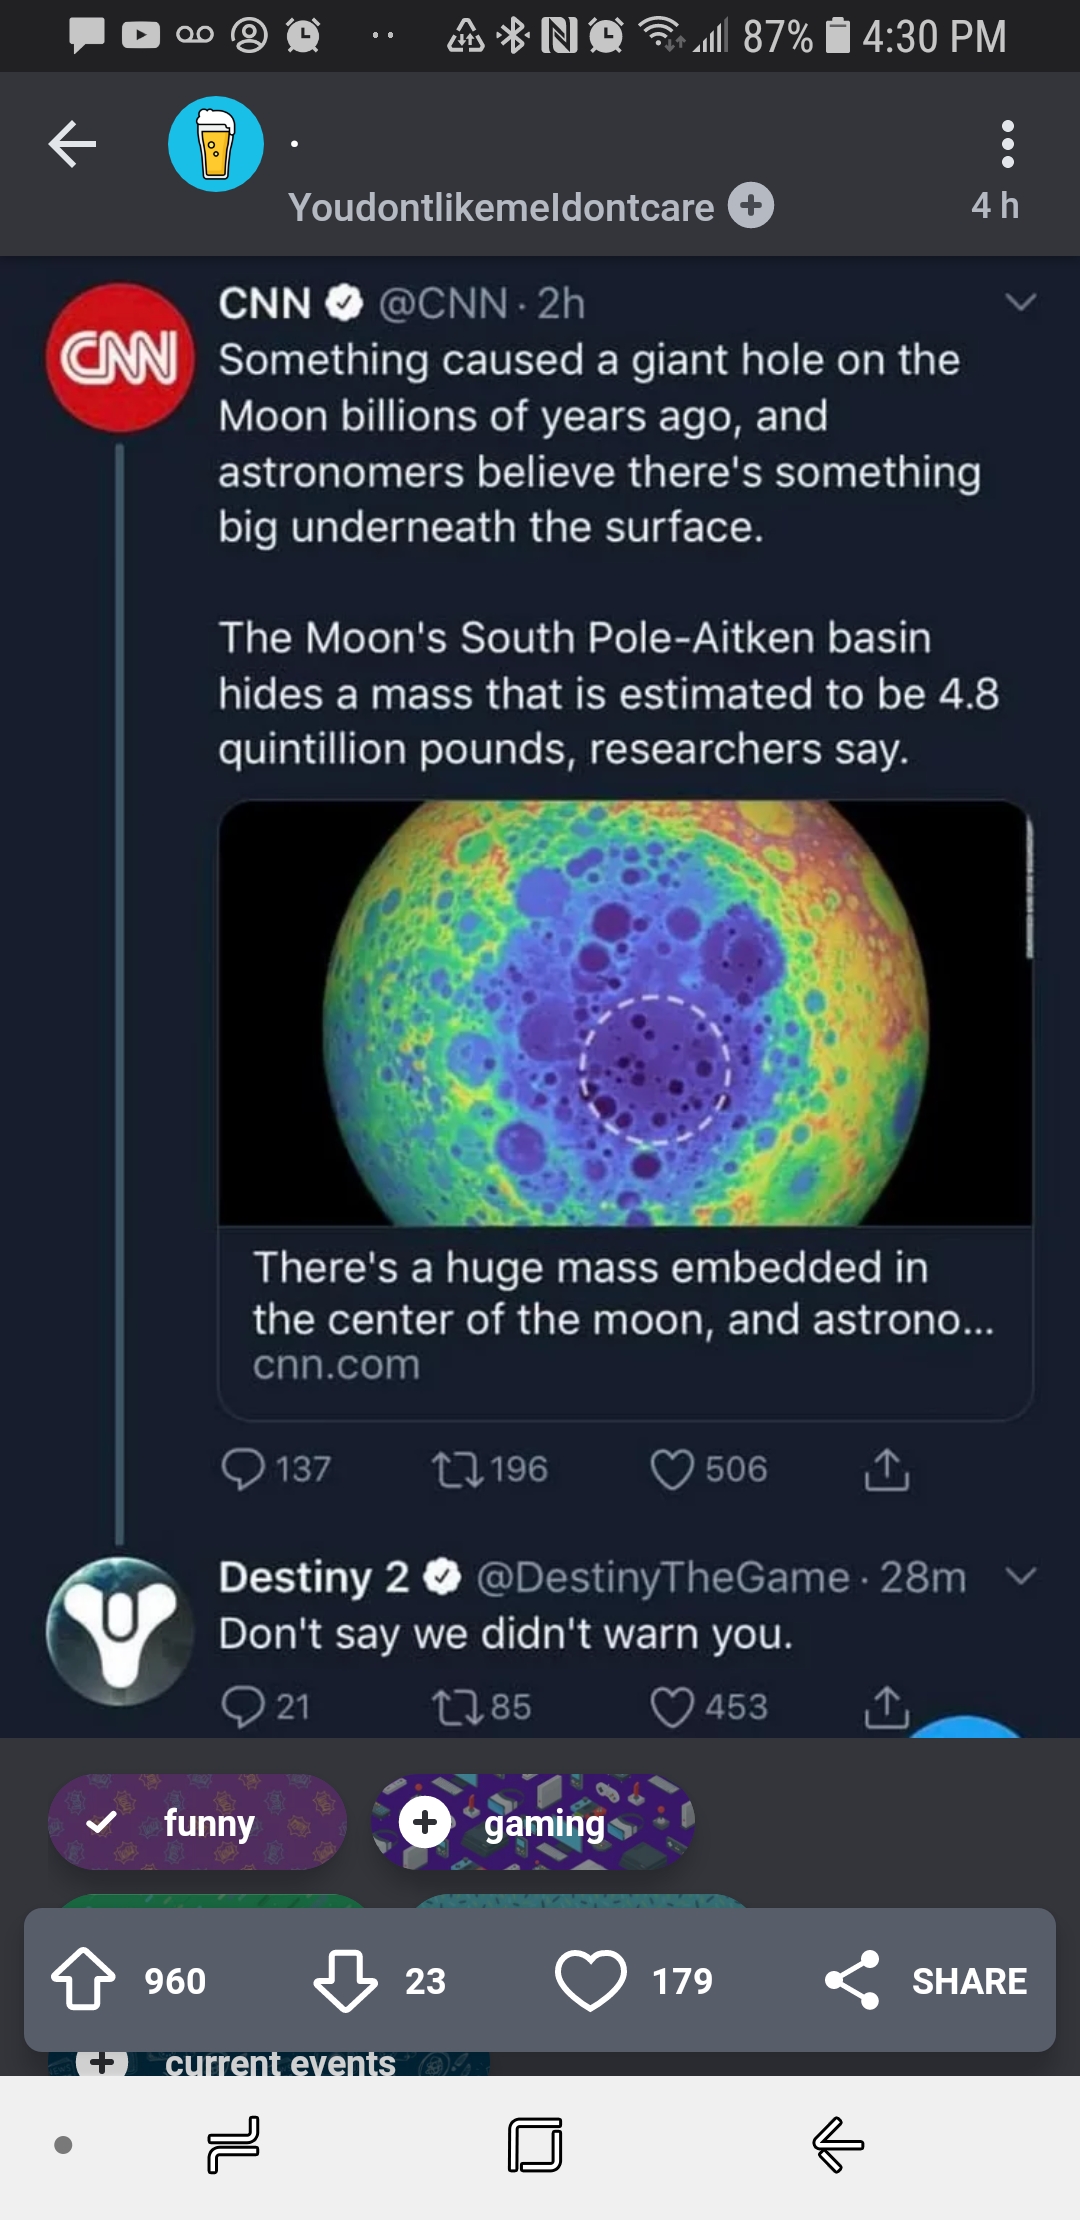 moons haunted destiny meme - B. No. 87% Youdontmeldontcare 45 Cnn Cnn 2h Something caused a giant hole on the Moon billions of years ago, and astronomers believe there's something big underneath the surface. The Moon's South PoleAitken basin hides a mass 